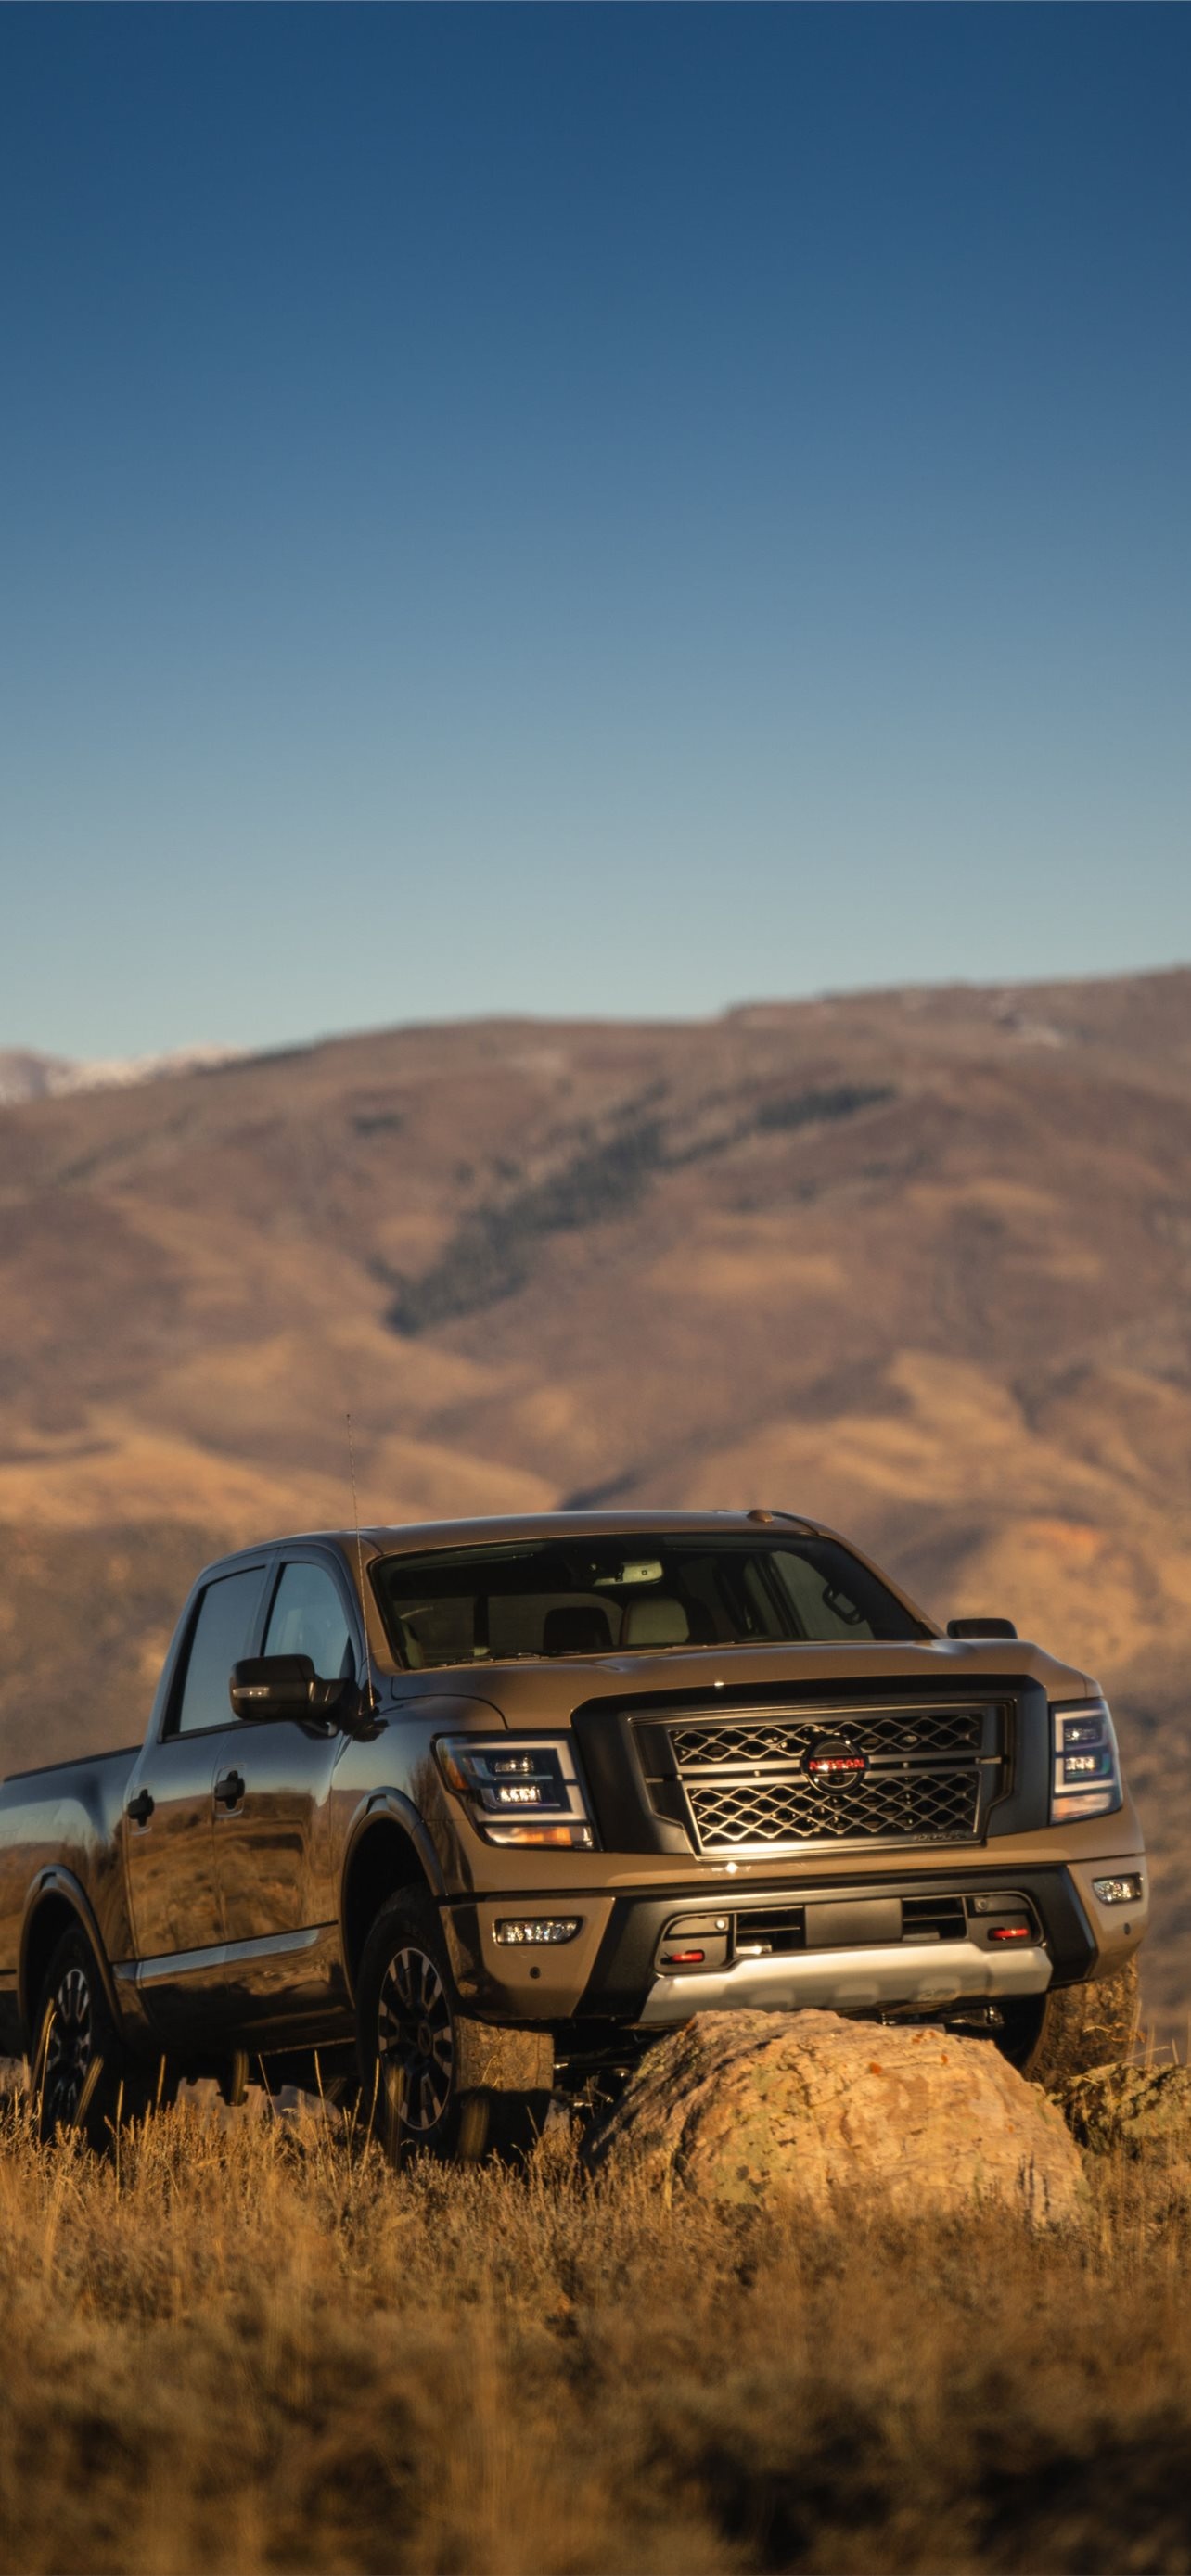 Nissan Titan, Best iPhone HD wallpapers, Auto enthusiasts, 1290x2780 HD Handy